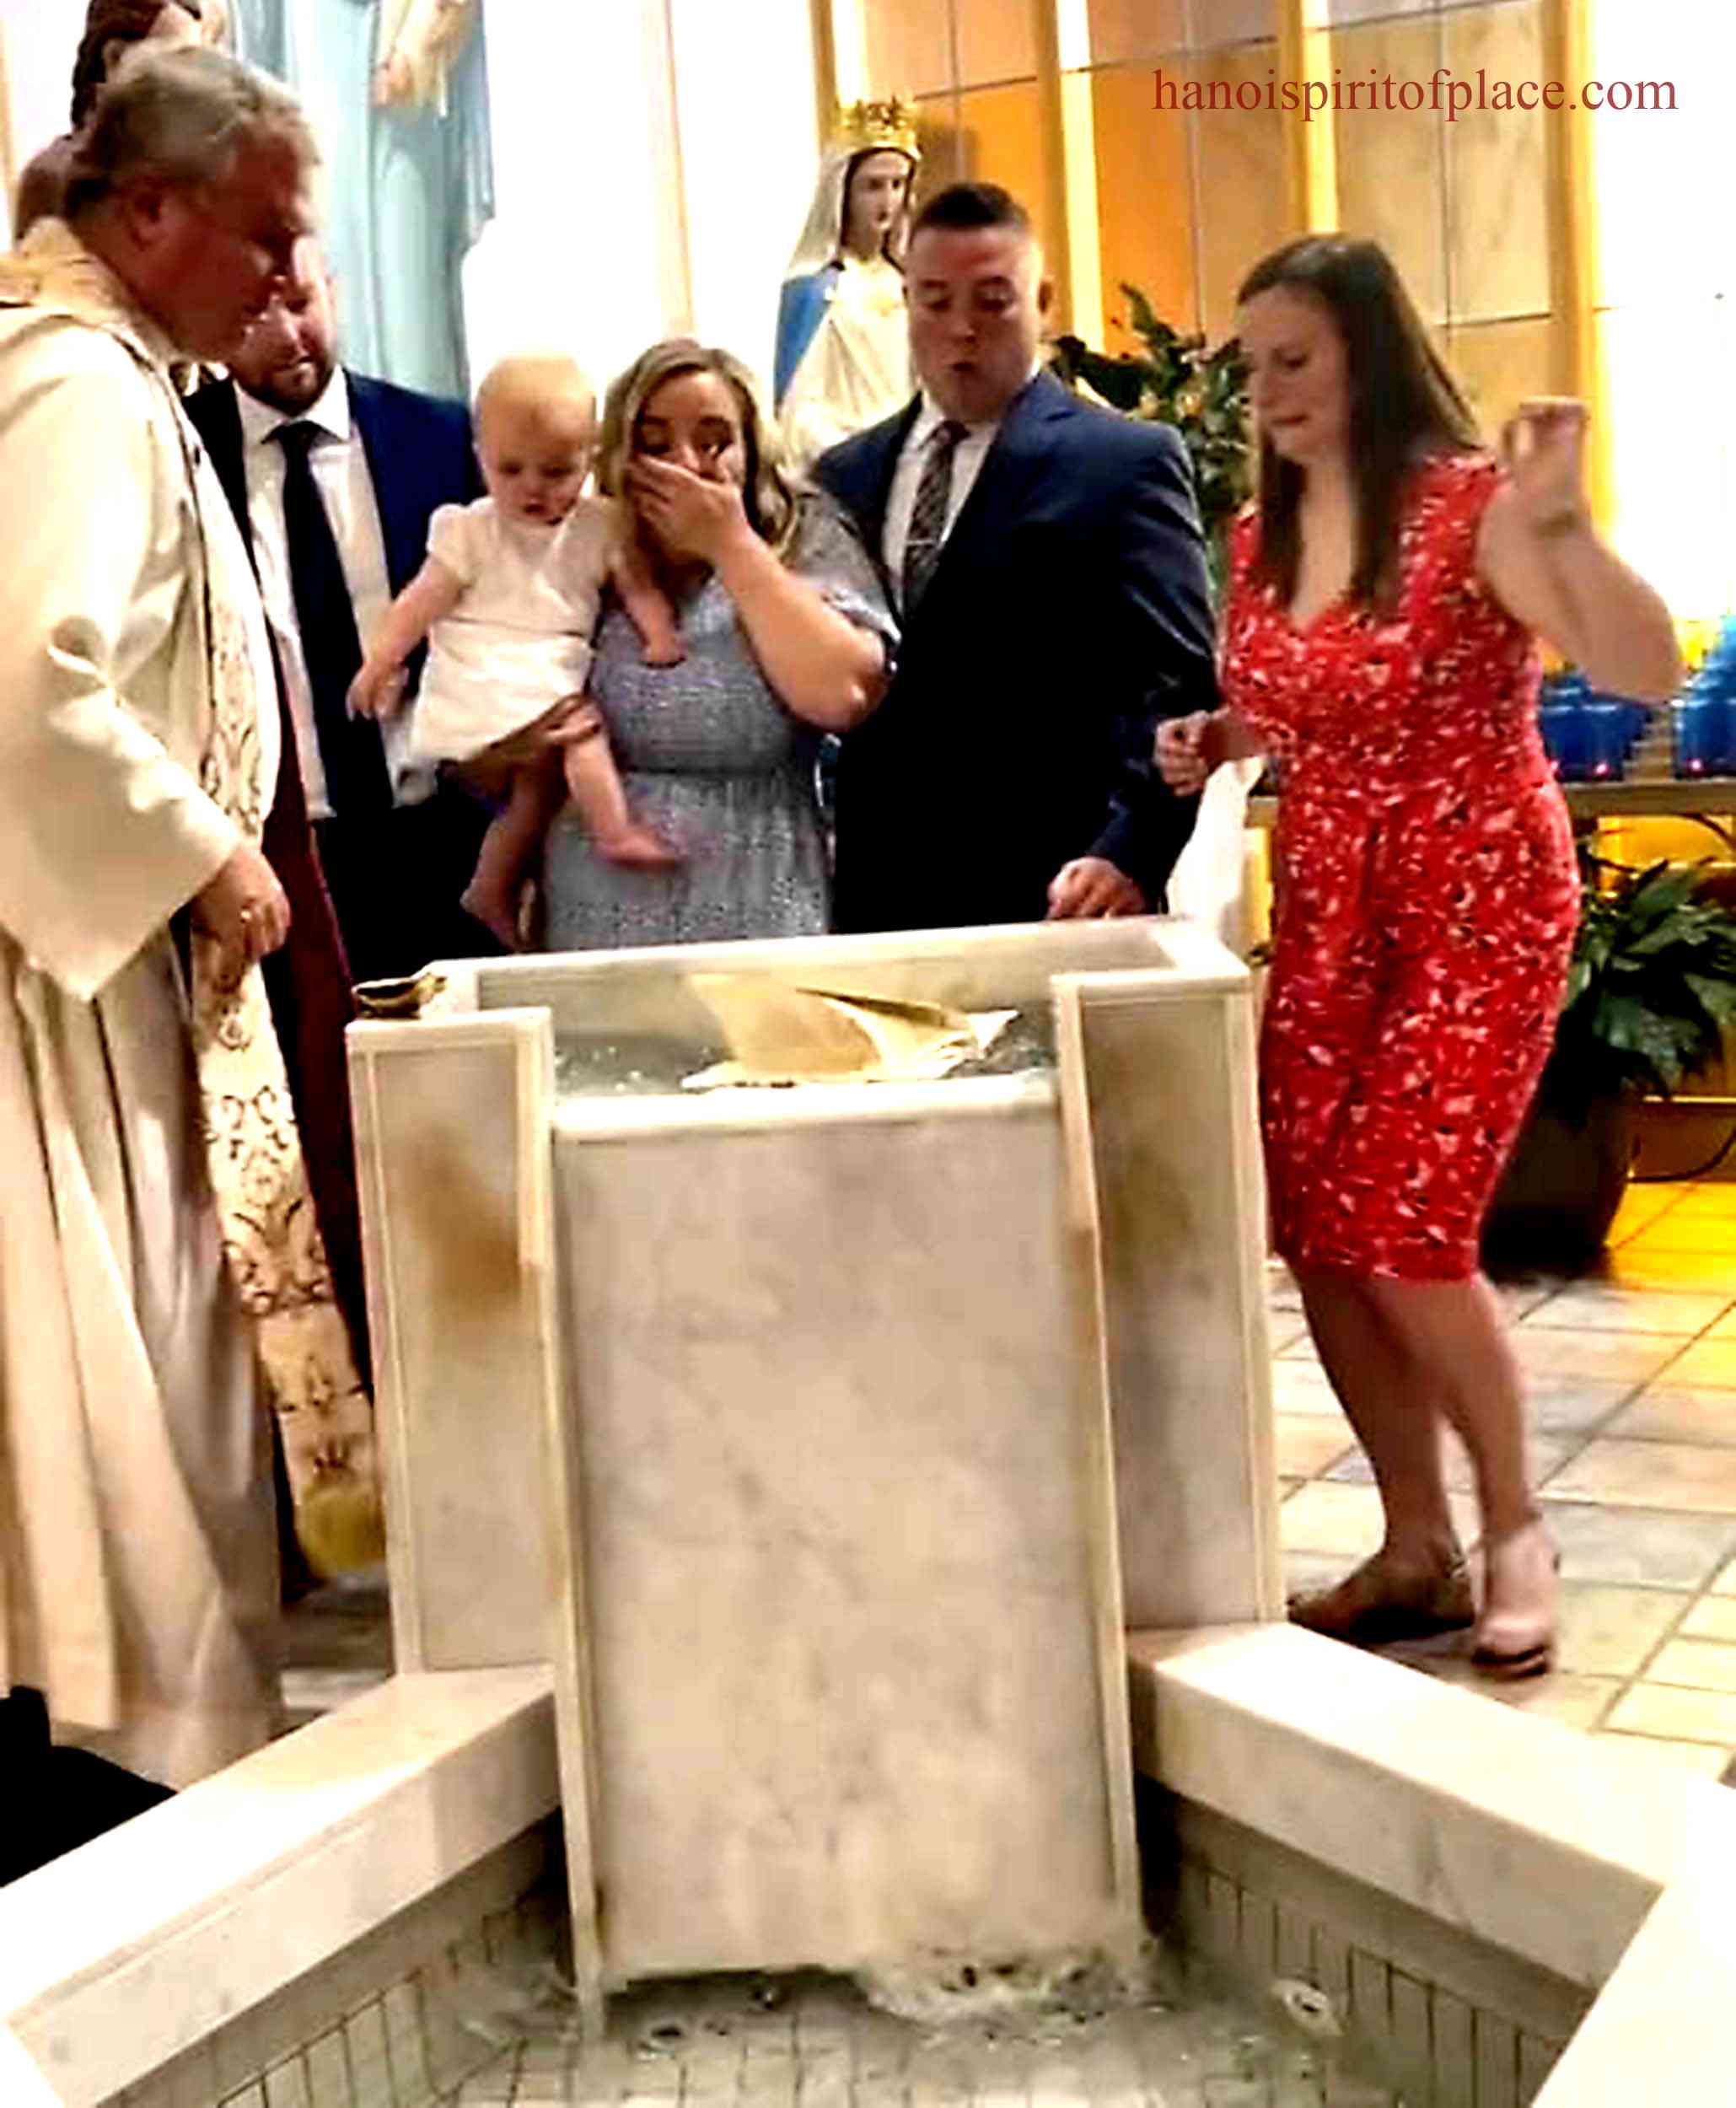 The Viral Baptism Gone Wrong Video